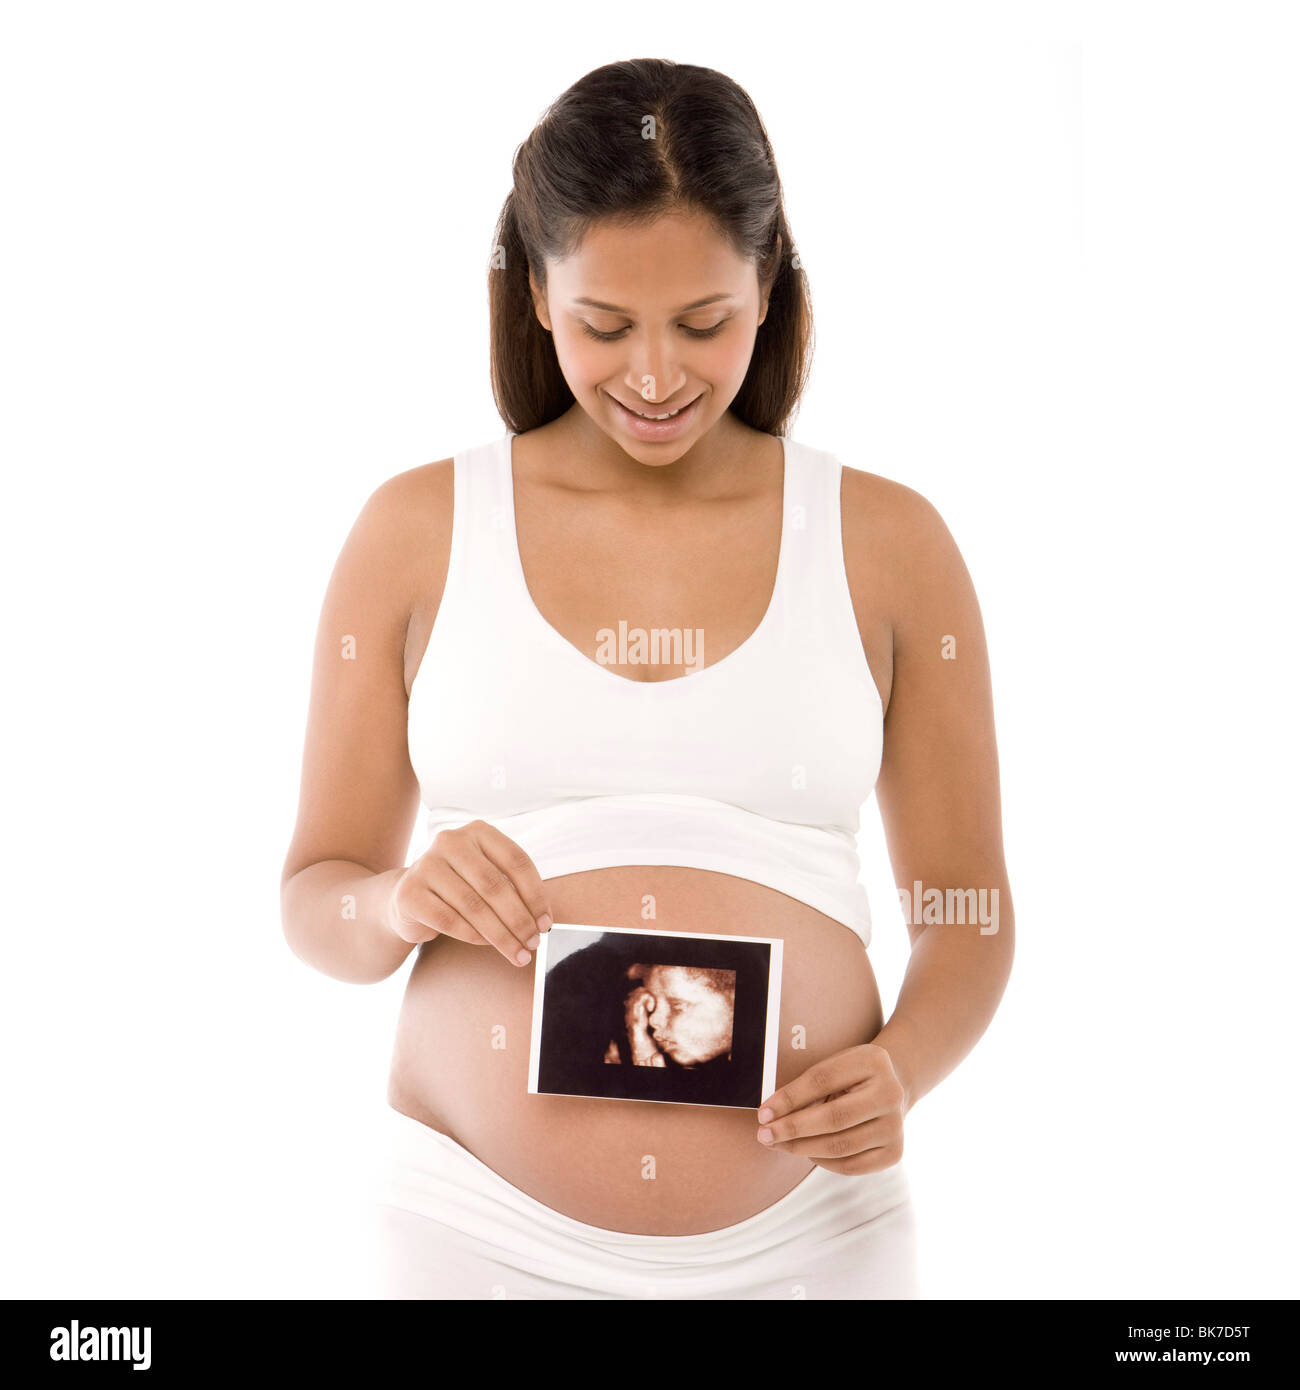 Pregnant woman holding her baby scan Banque D'Images